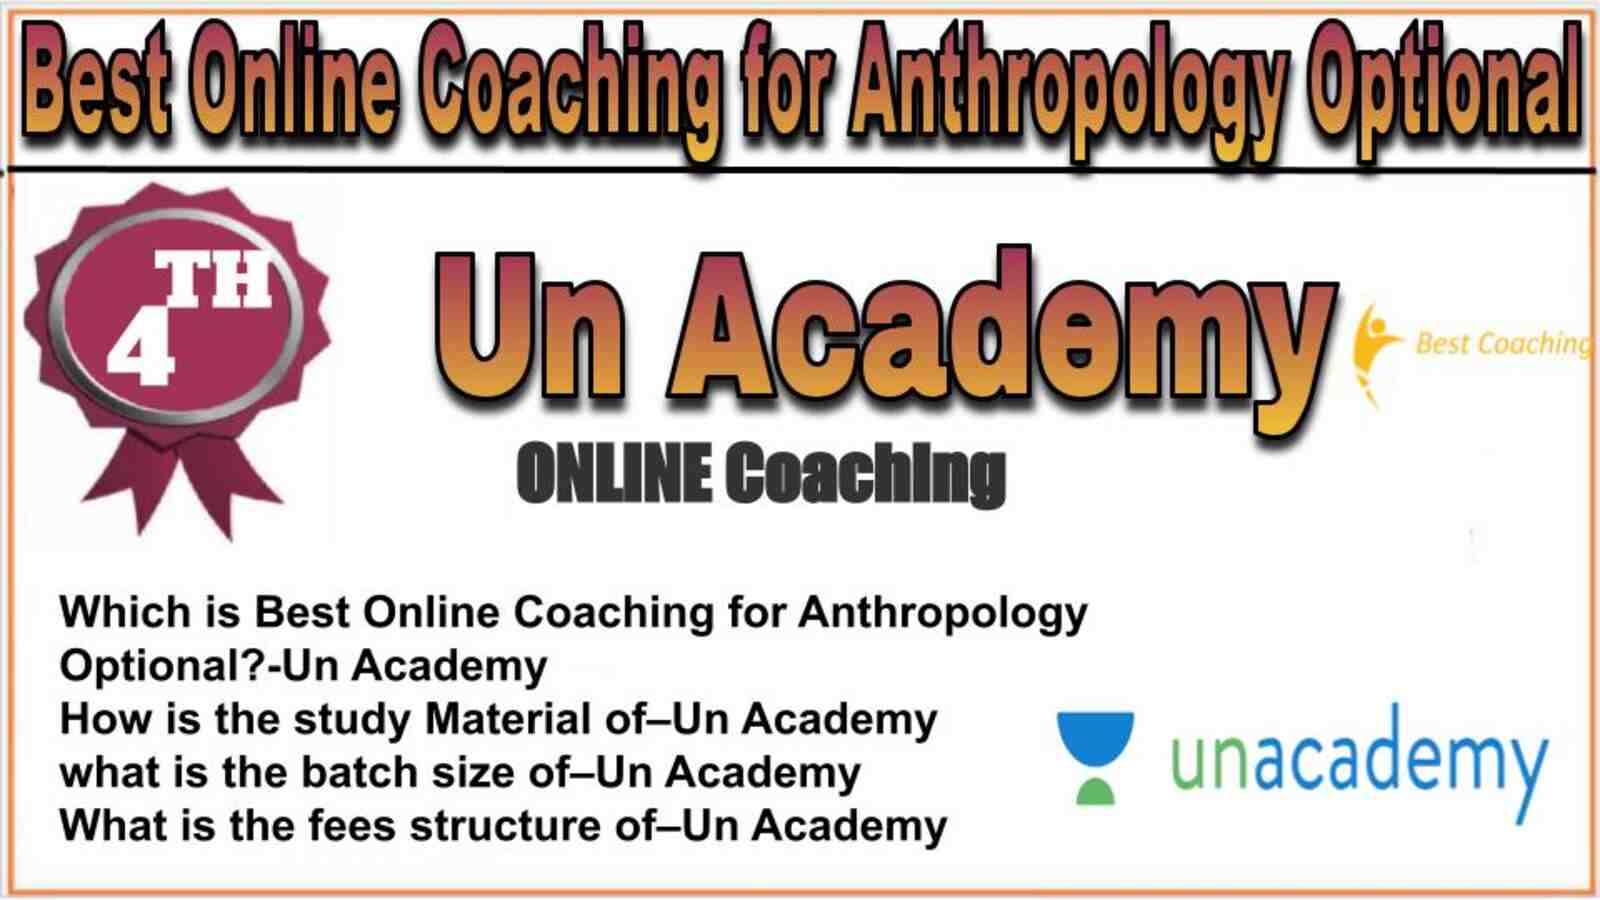 Rank 4 best online coaching for Anthropology Optional